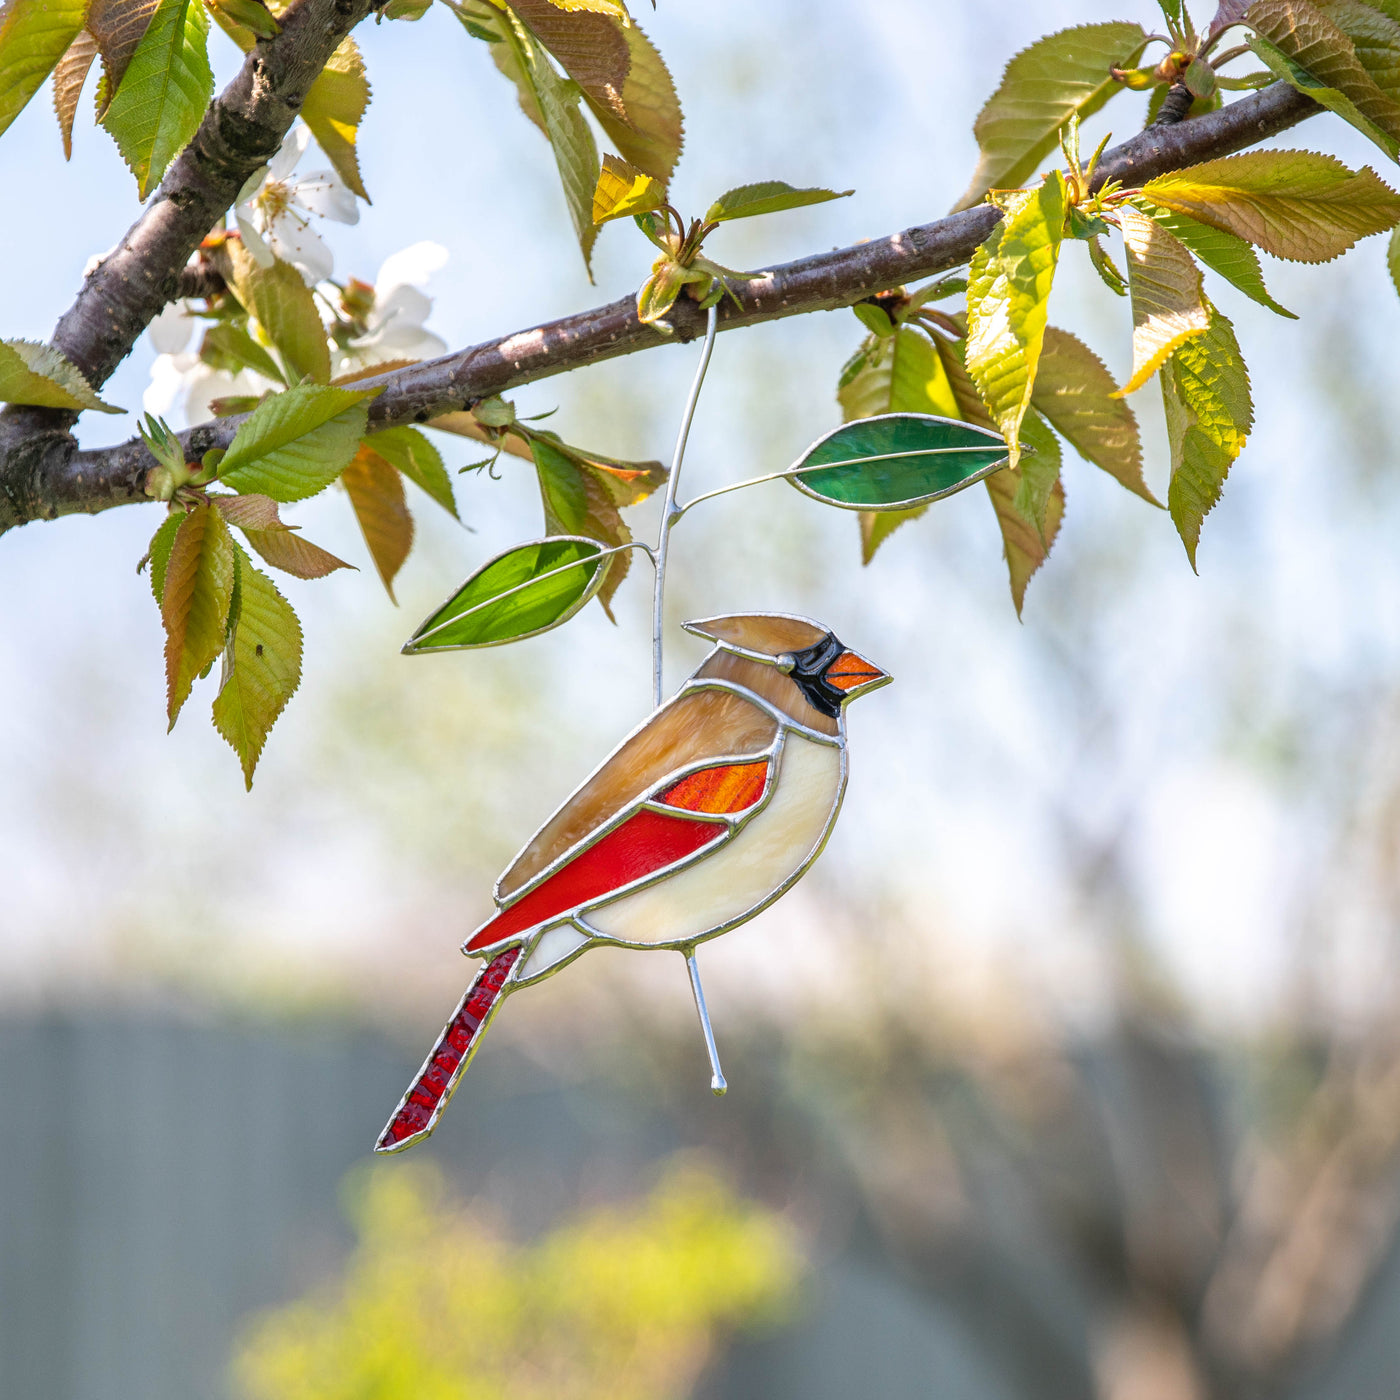 Stained glass suncatcher of female cardinal sitting on the branch with leaves